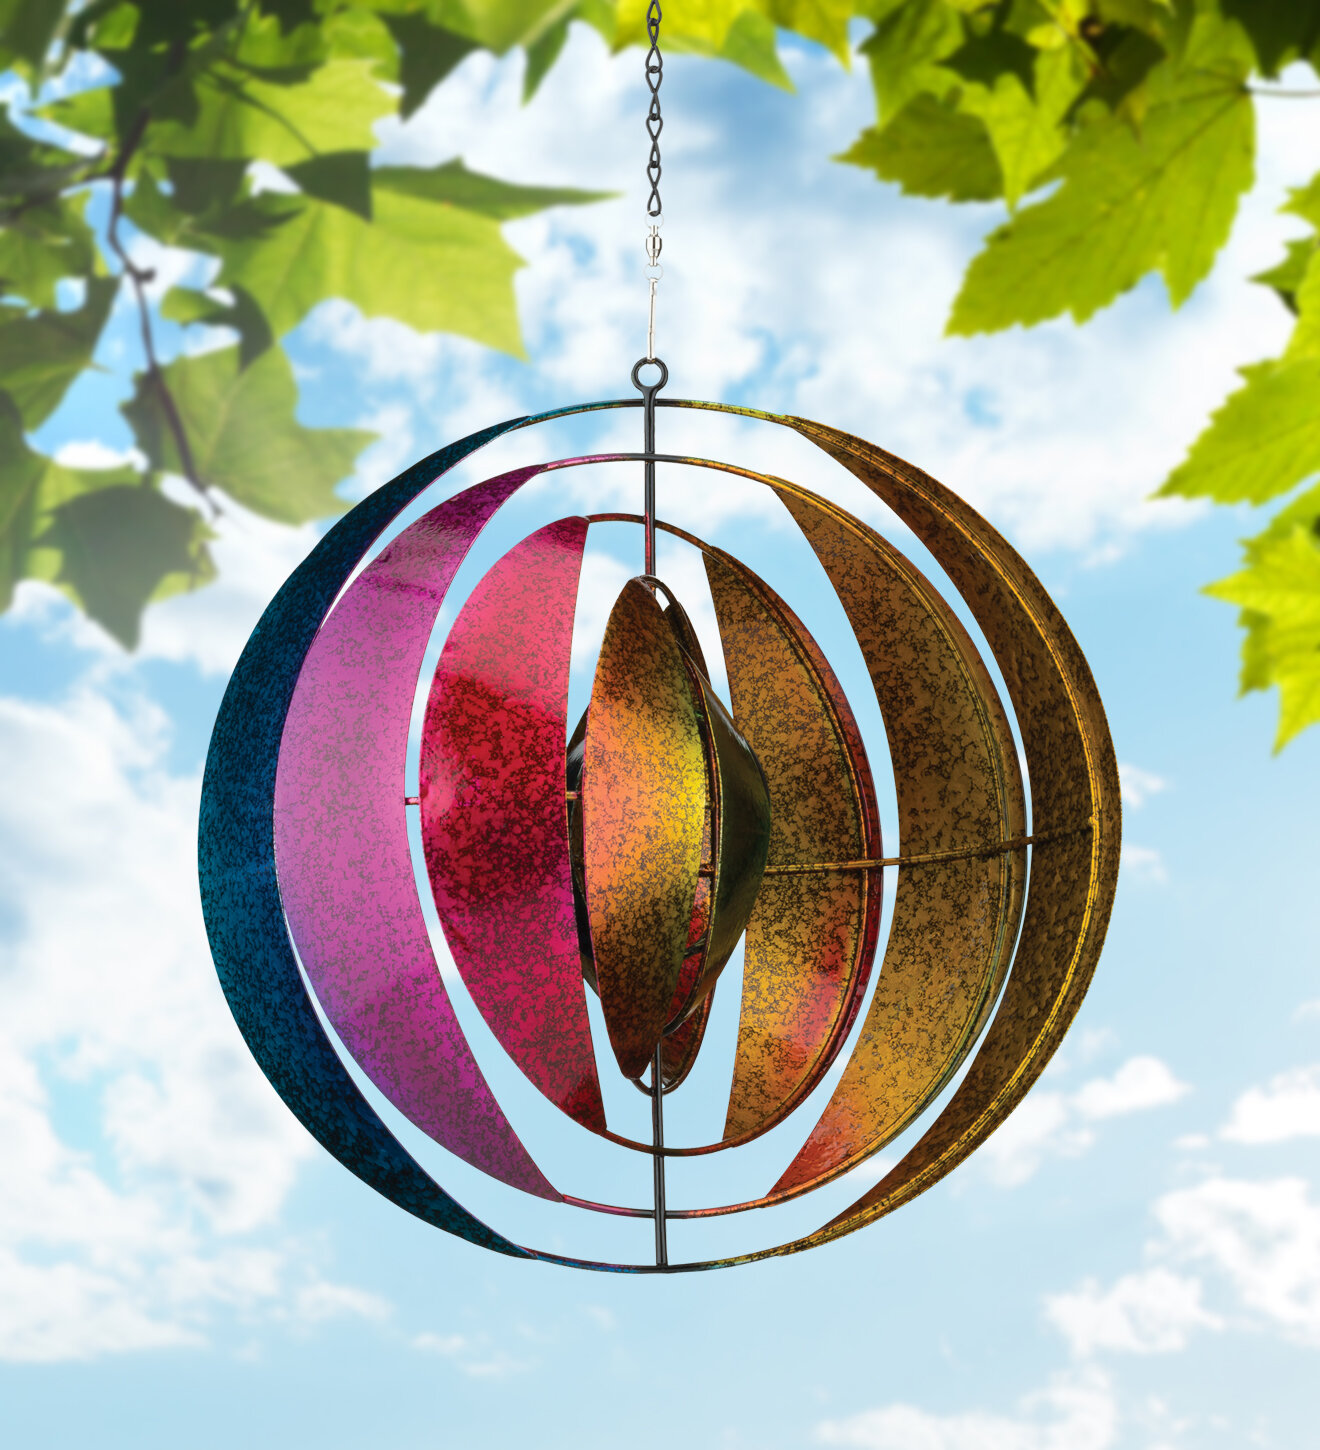 Hanging Spiral Wind Spinner with Solar Lights